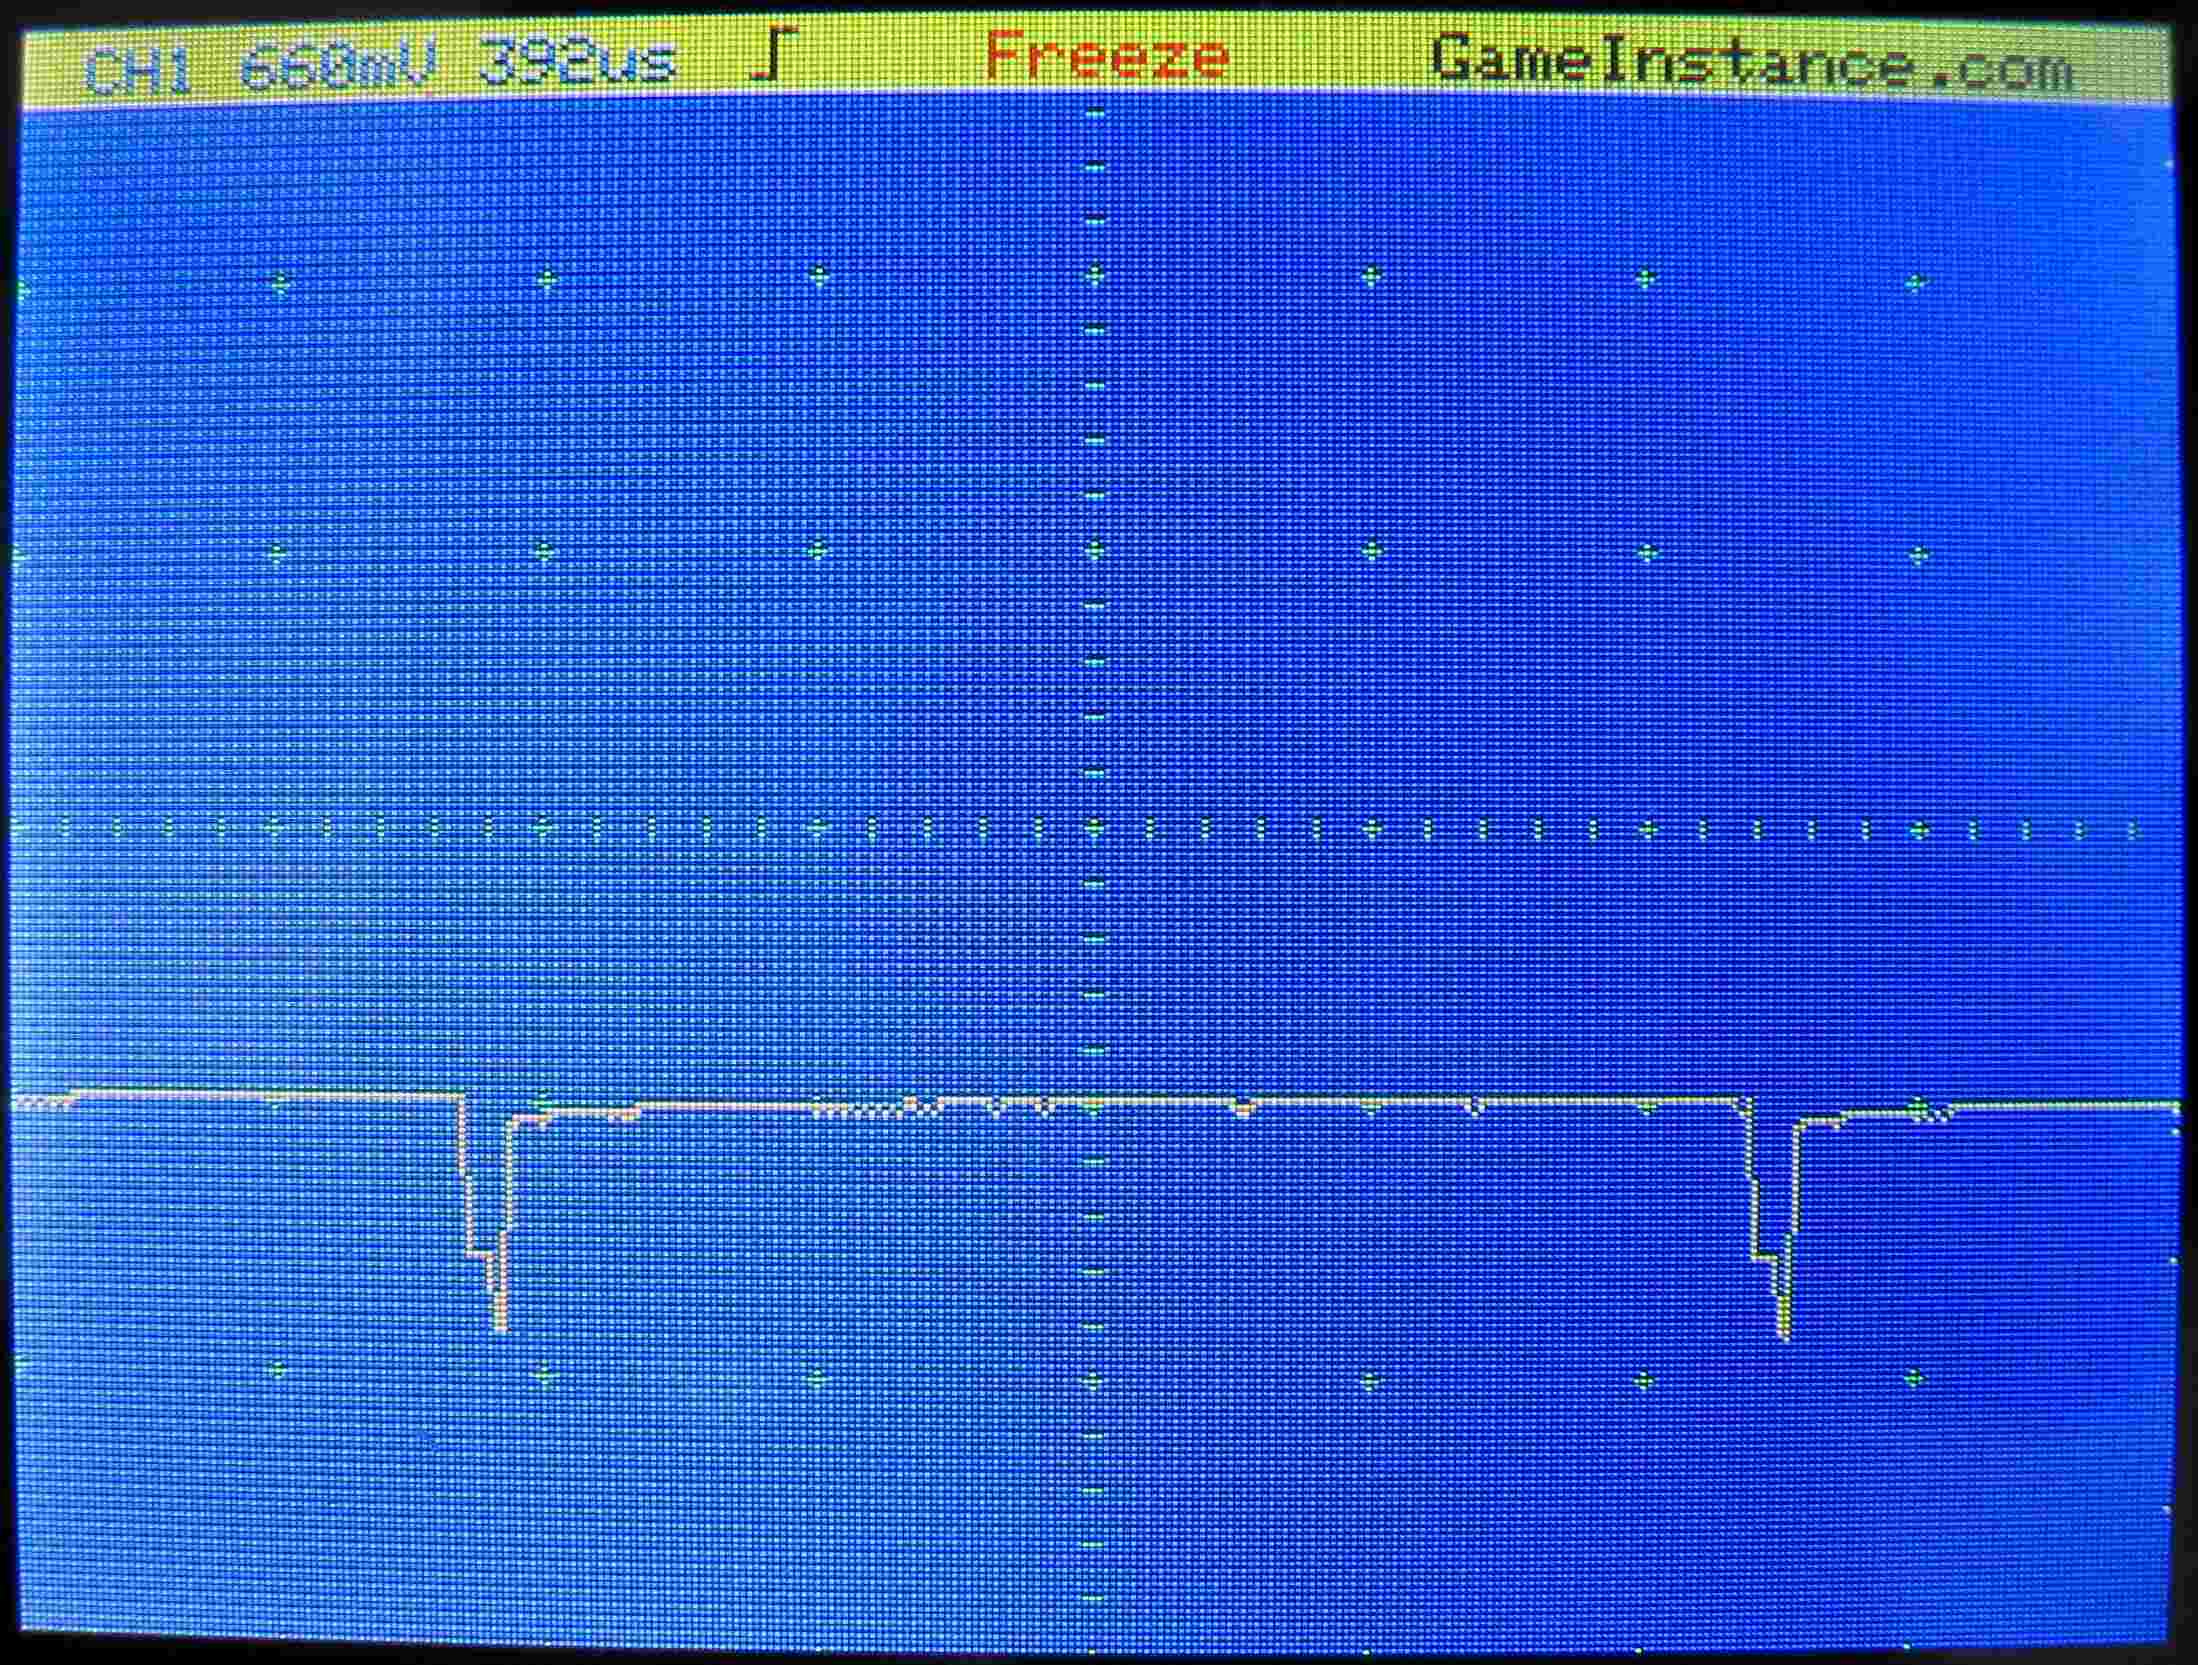 Wave shape in Q<sub>1</sub>'s gate - a distorted 96.875% duty cycle PWM signal, attenuated by a 1/11 factor